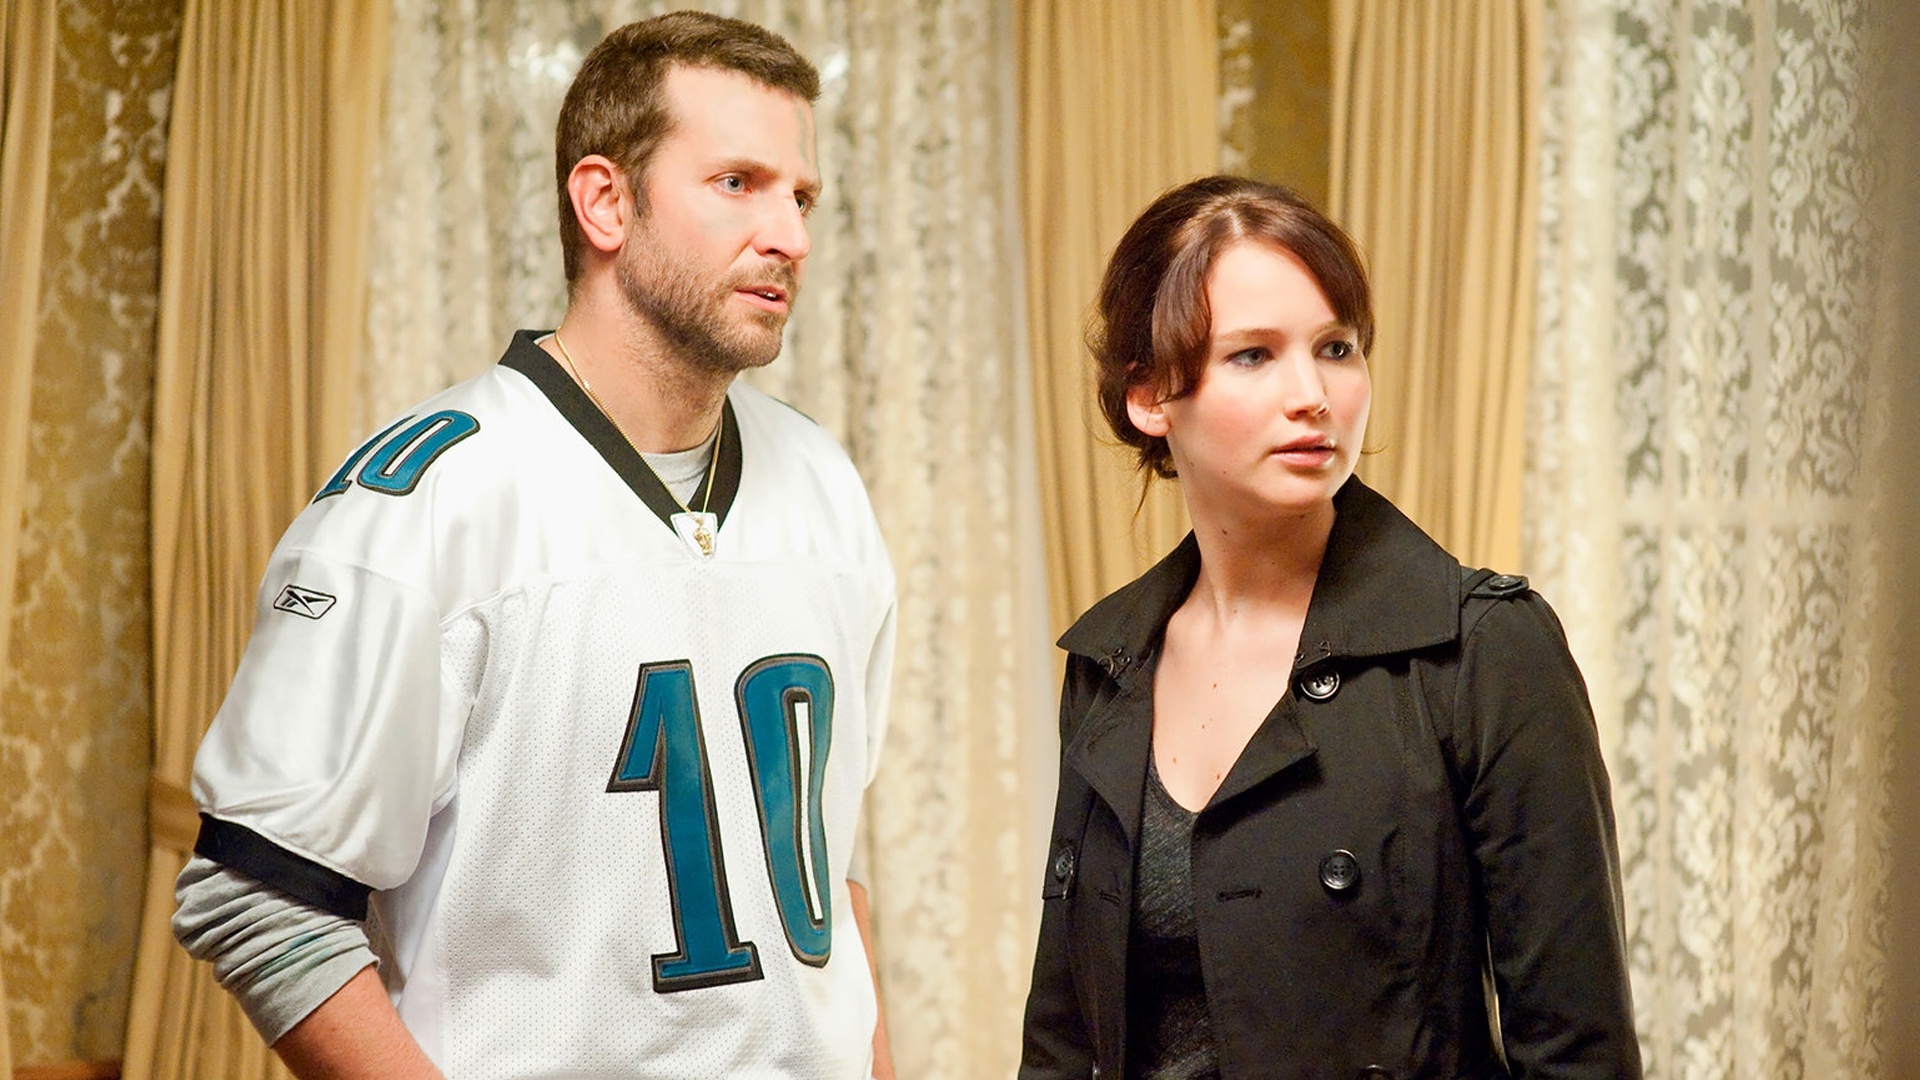 Silver Linings Playbook, Stream online in HD, Download and watch, Movie streaming on Stan, 1920x1080 Full HD Desktop